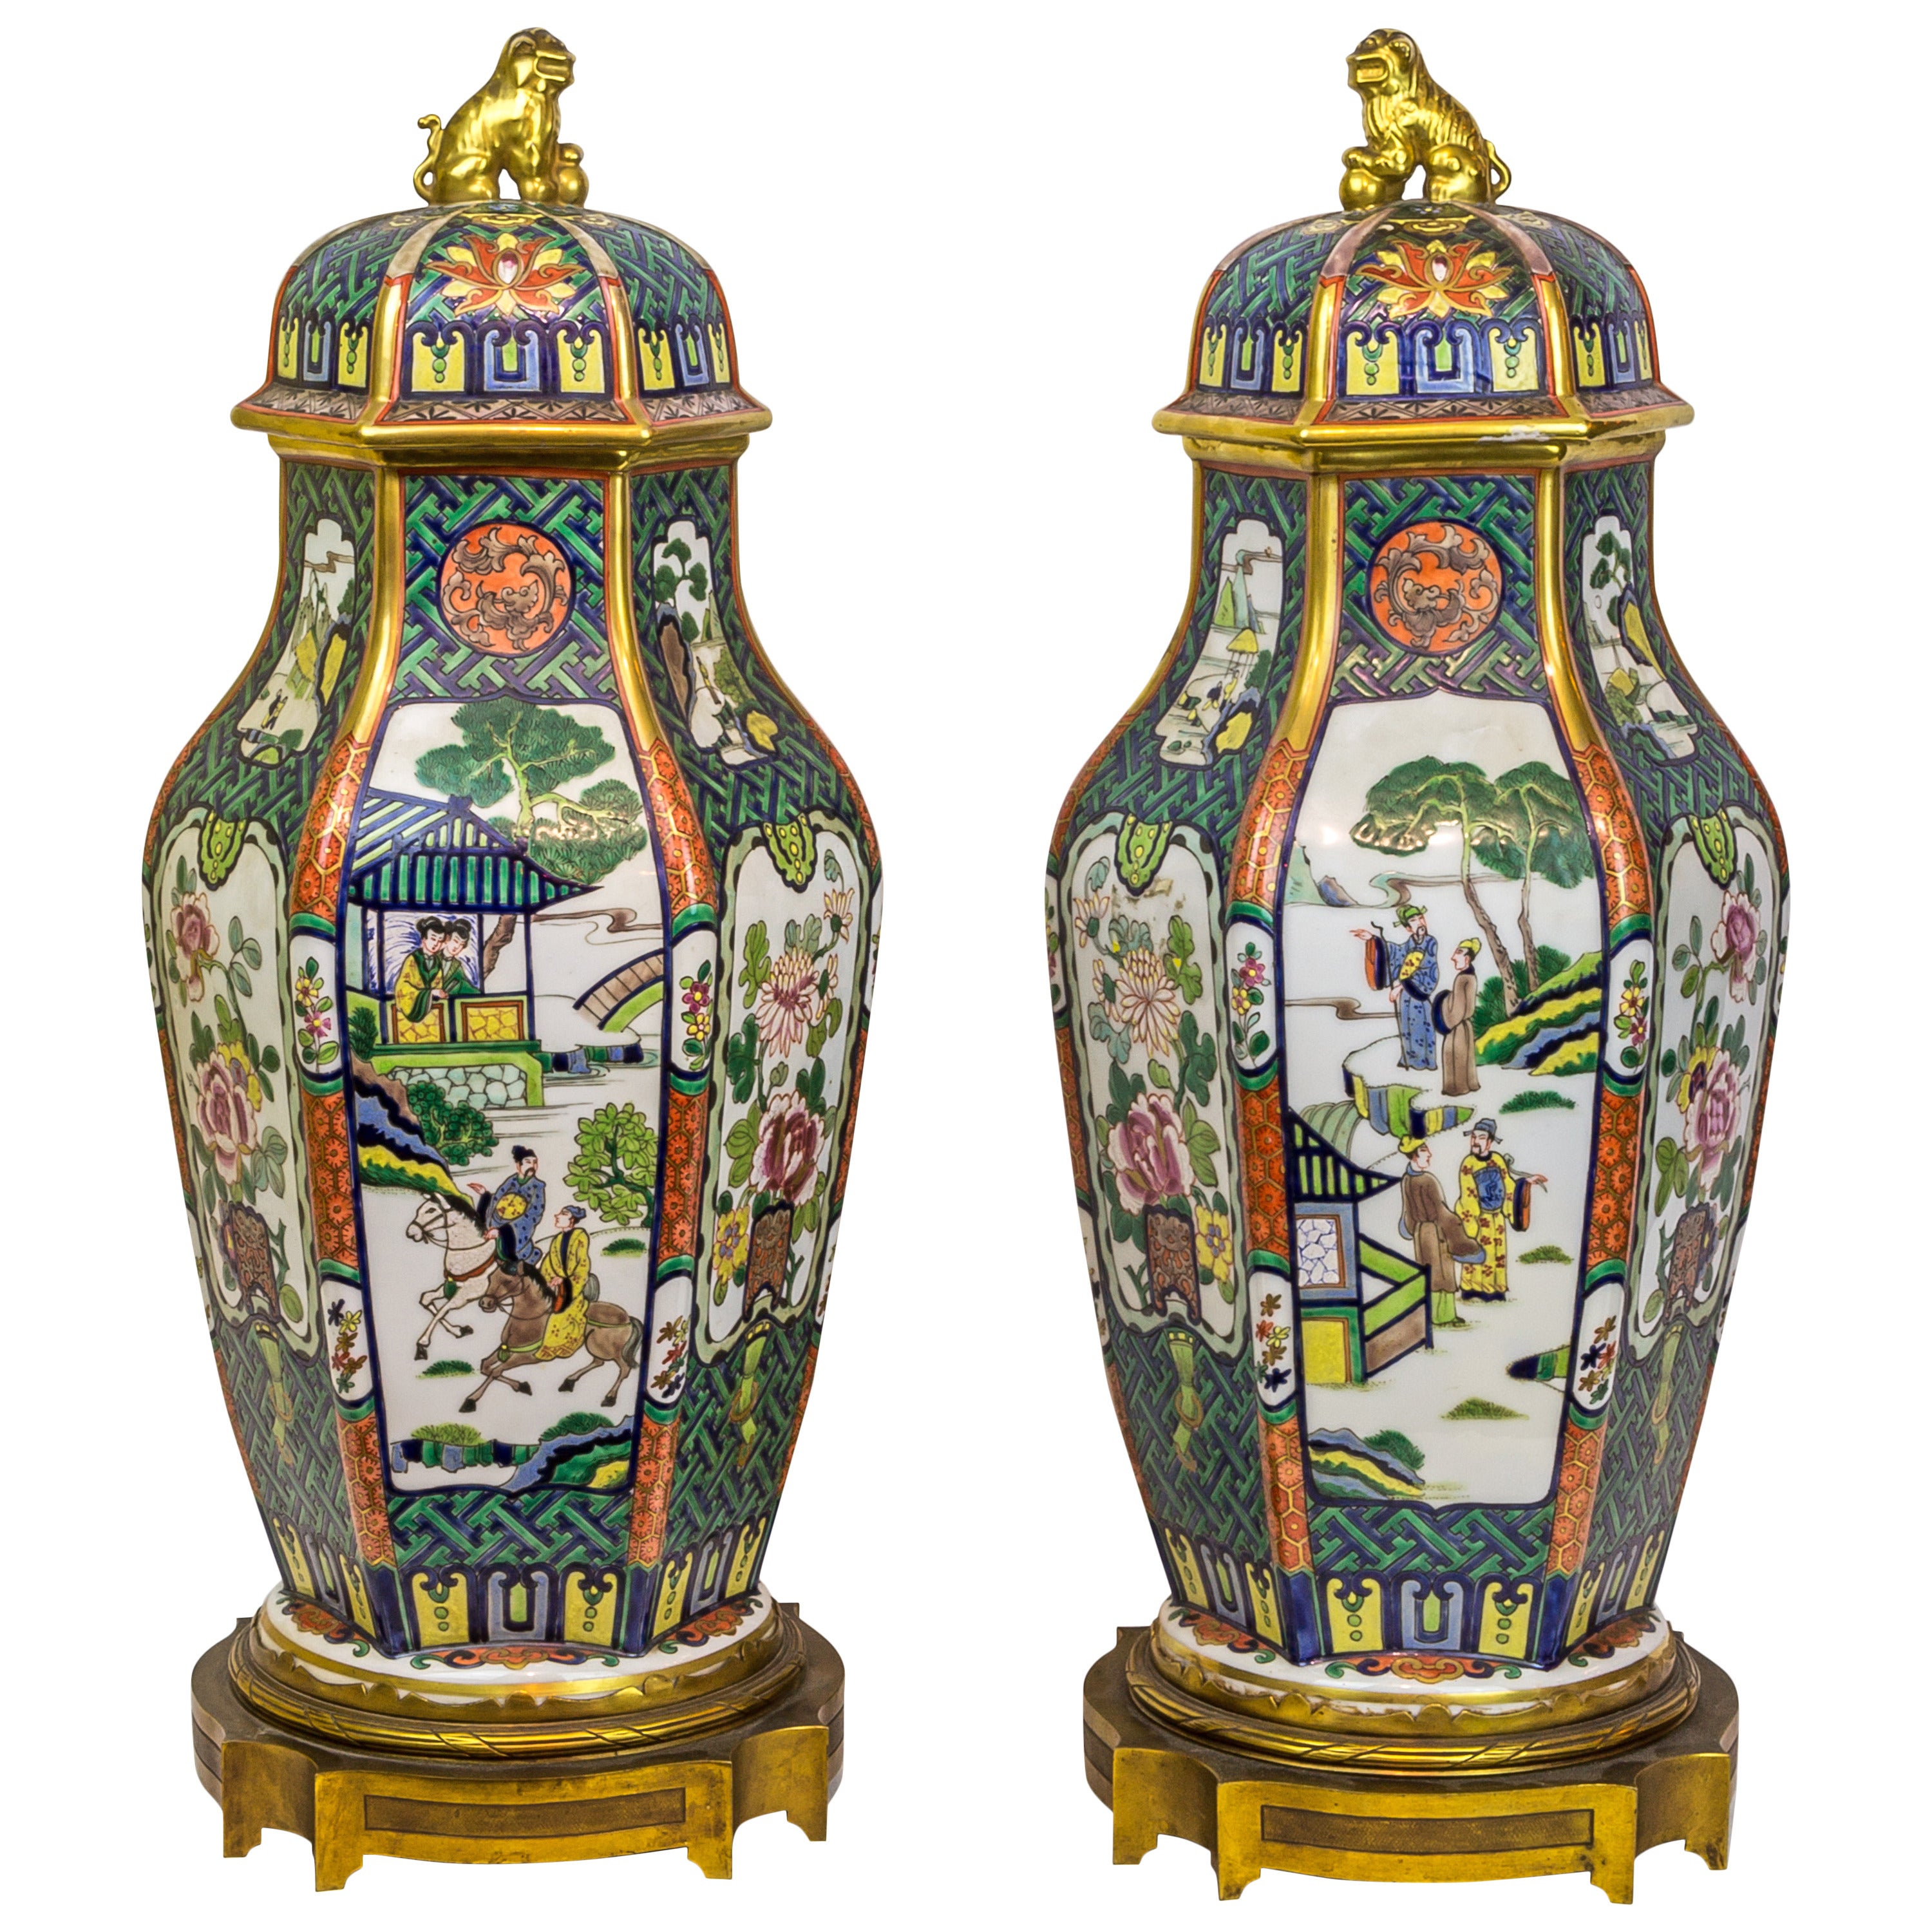 Hexagonal Pair of Porcelain and Bronze Chinoiserie Covered Urns